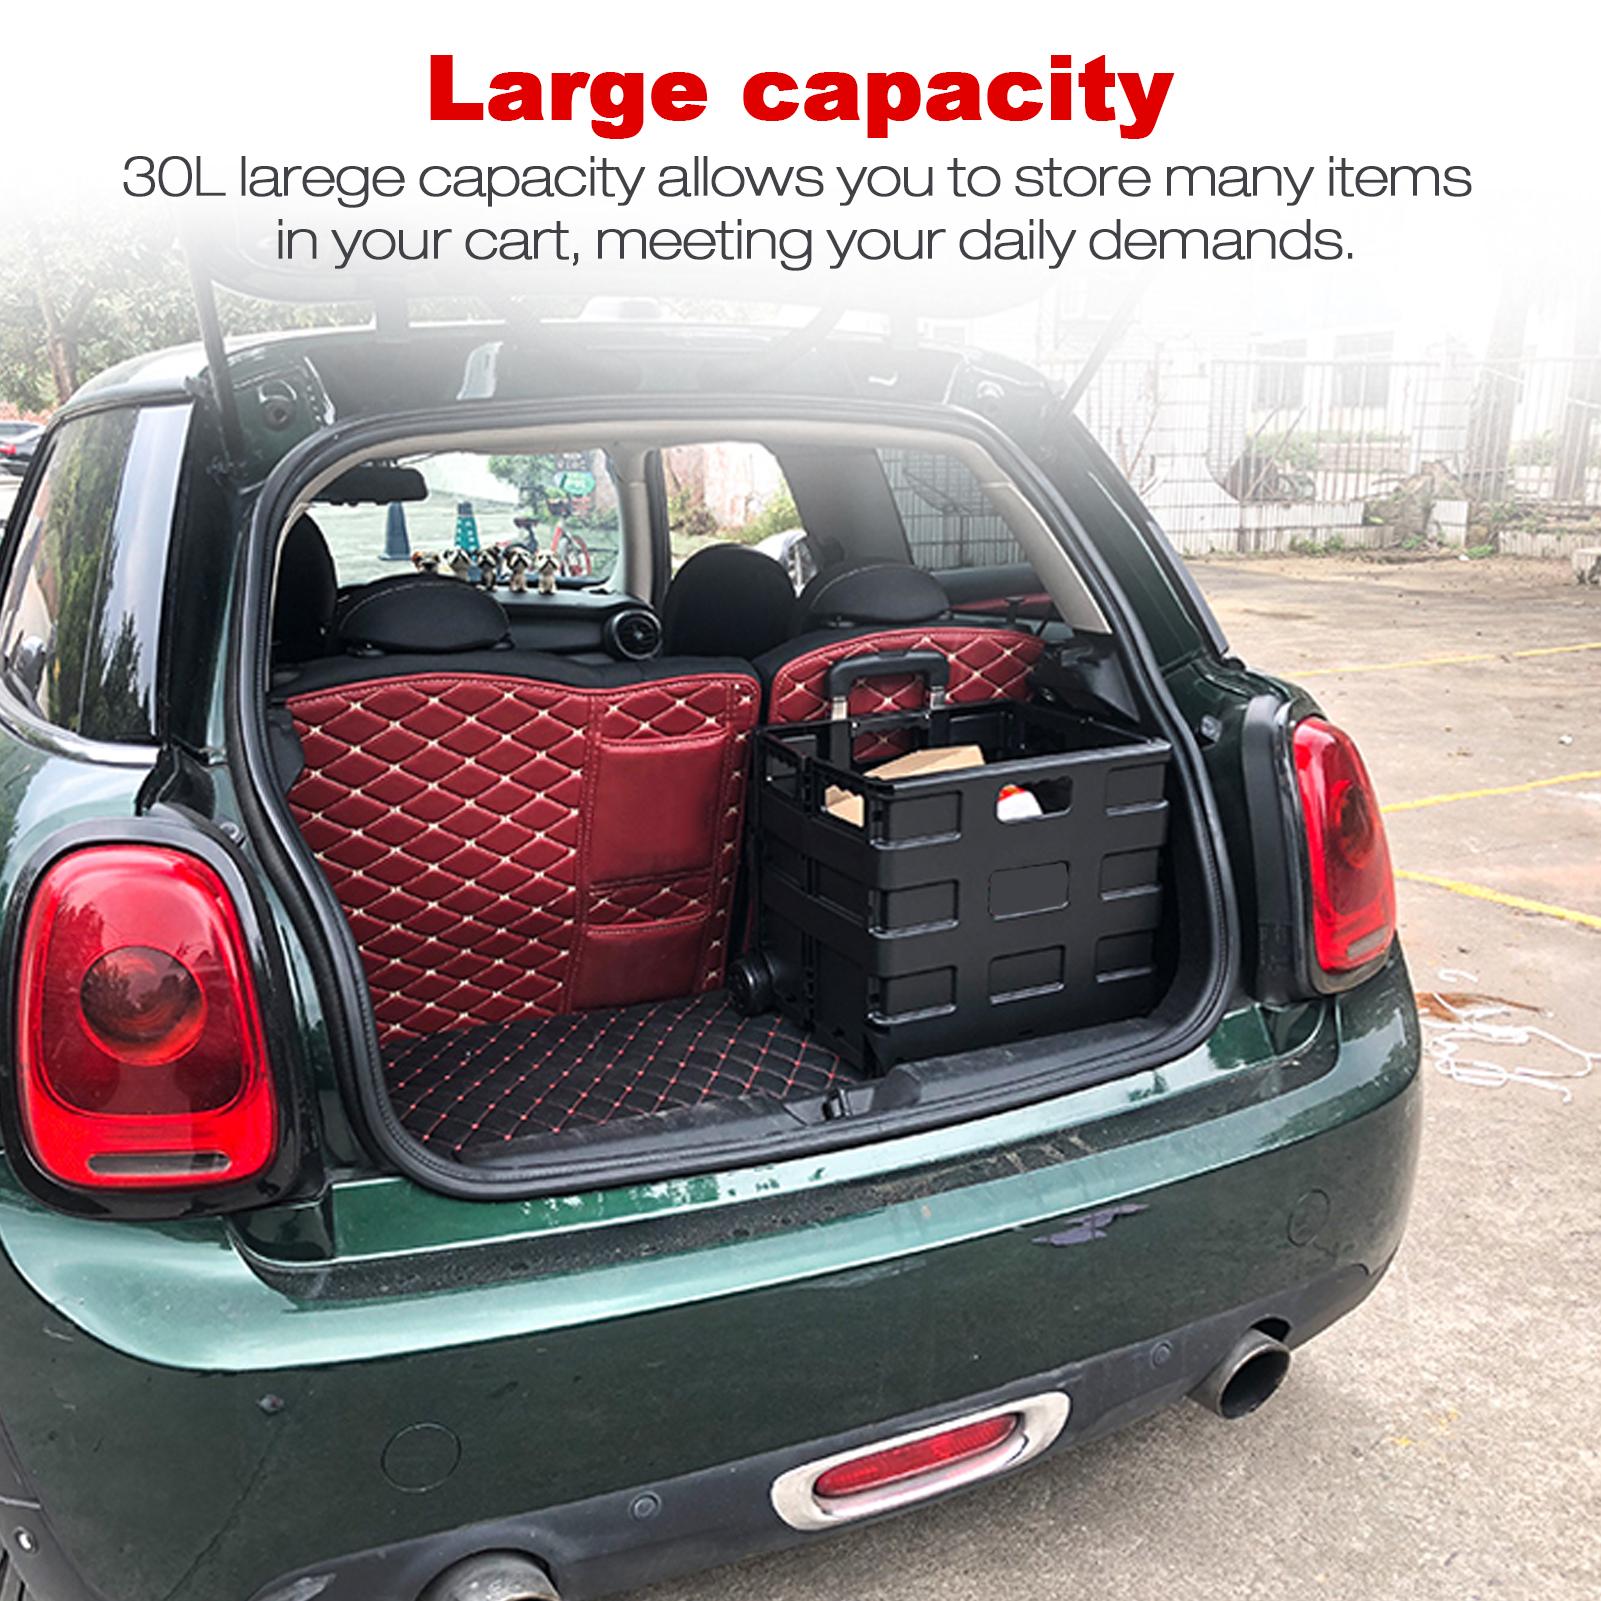 Foldable Shopping Cart with Handle 30L Large Capacity Collapsible   Handcart with Wheels